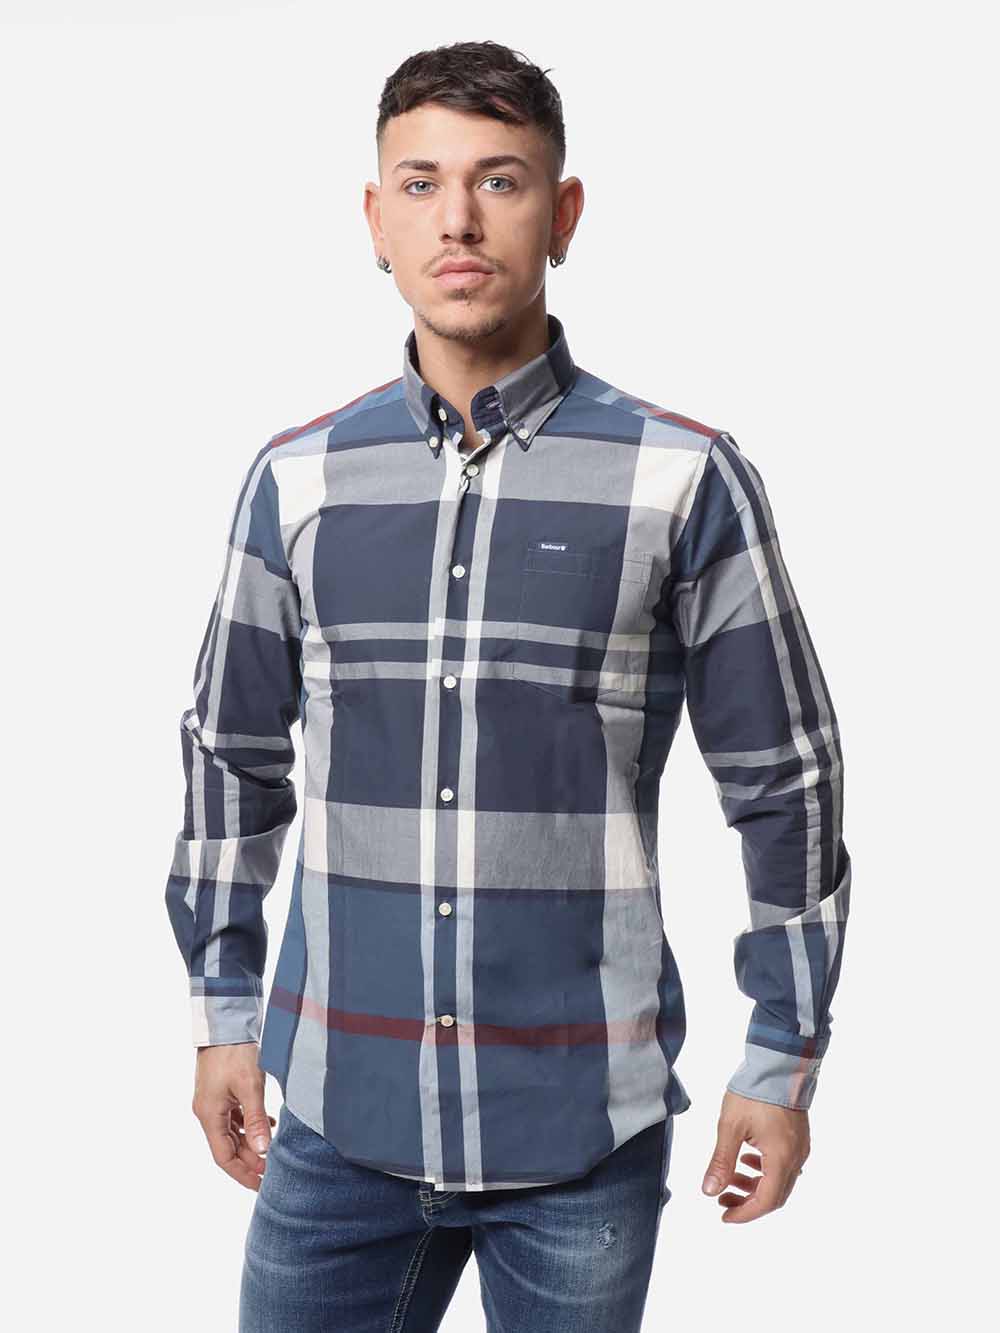 Barbour Camicia Uomo MSH5071 NAVY